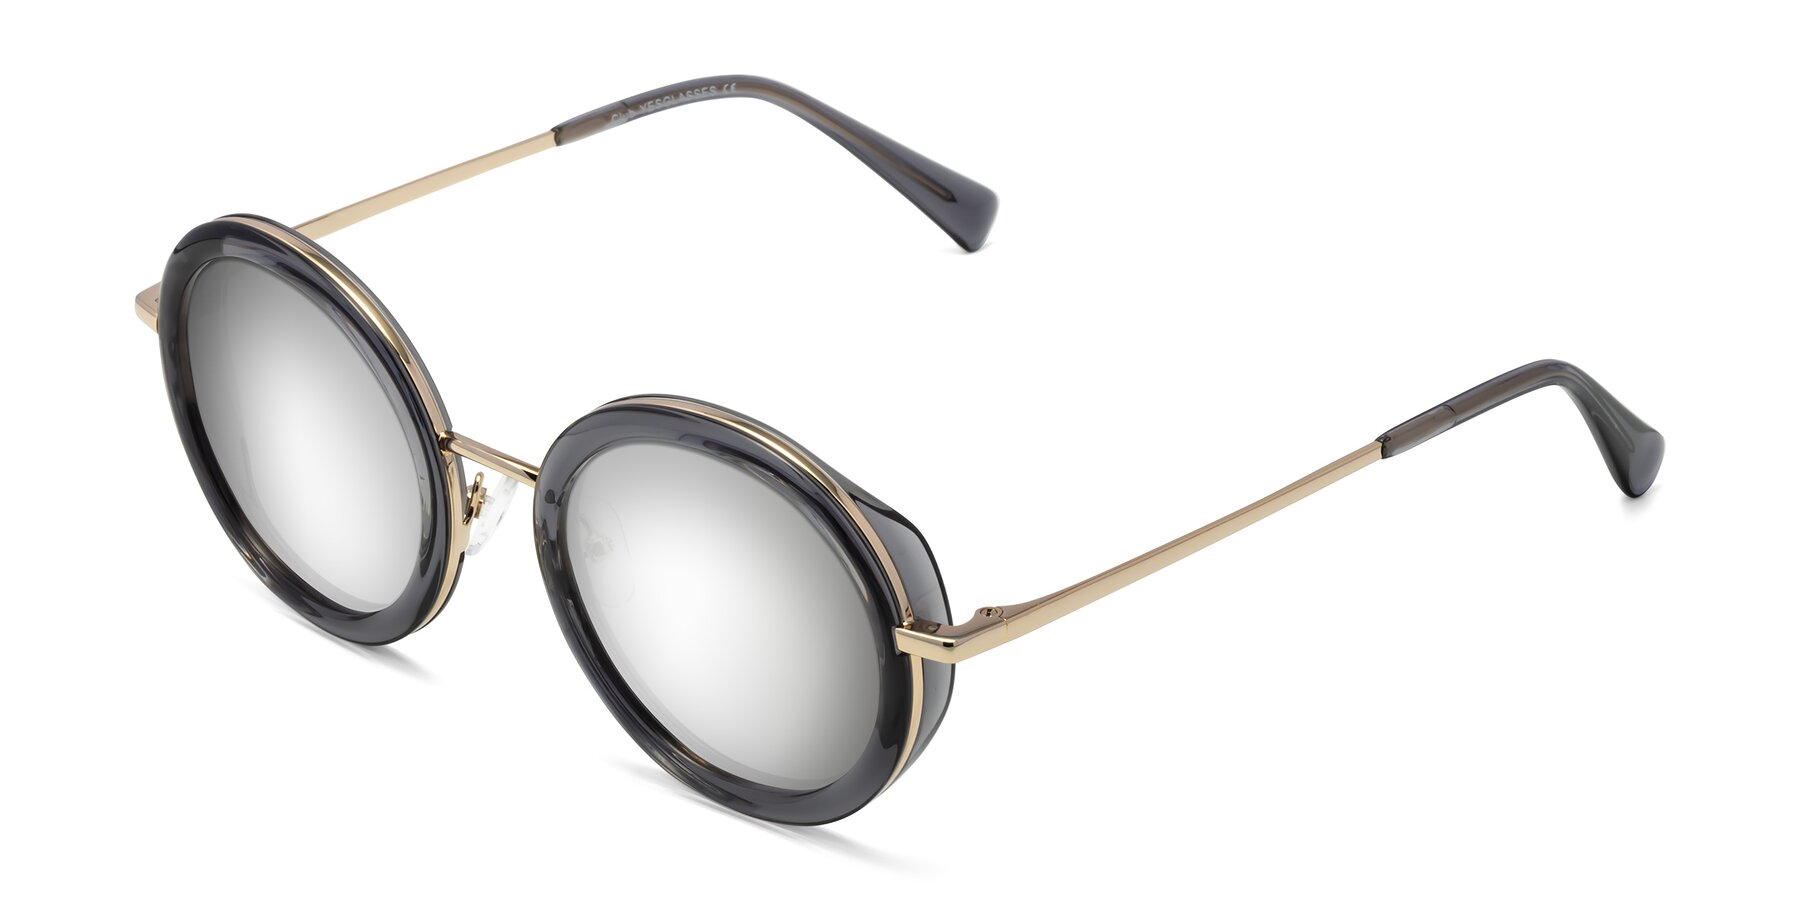 Angle of Club in Gray-Gold with Silver Mirrored Lenses